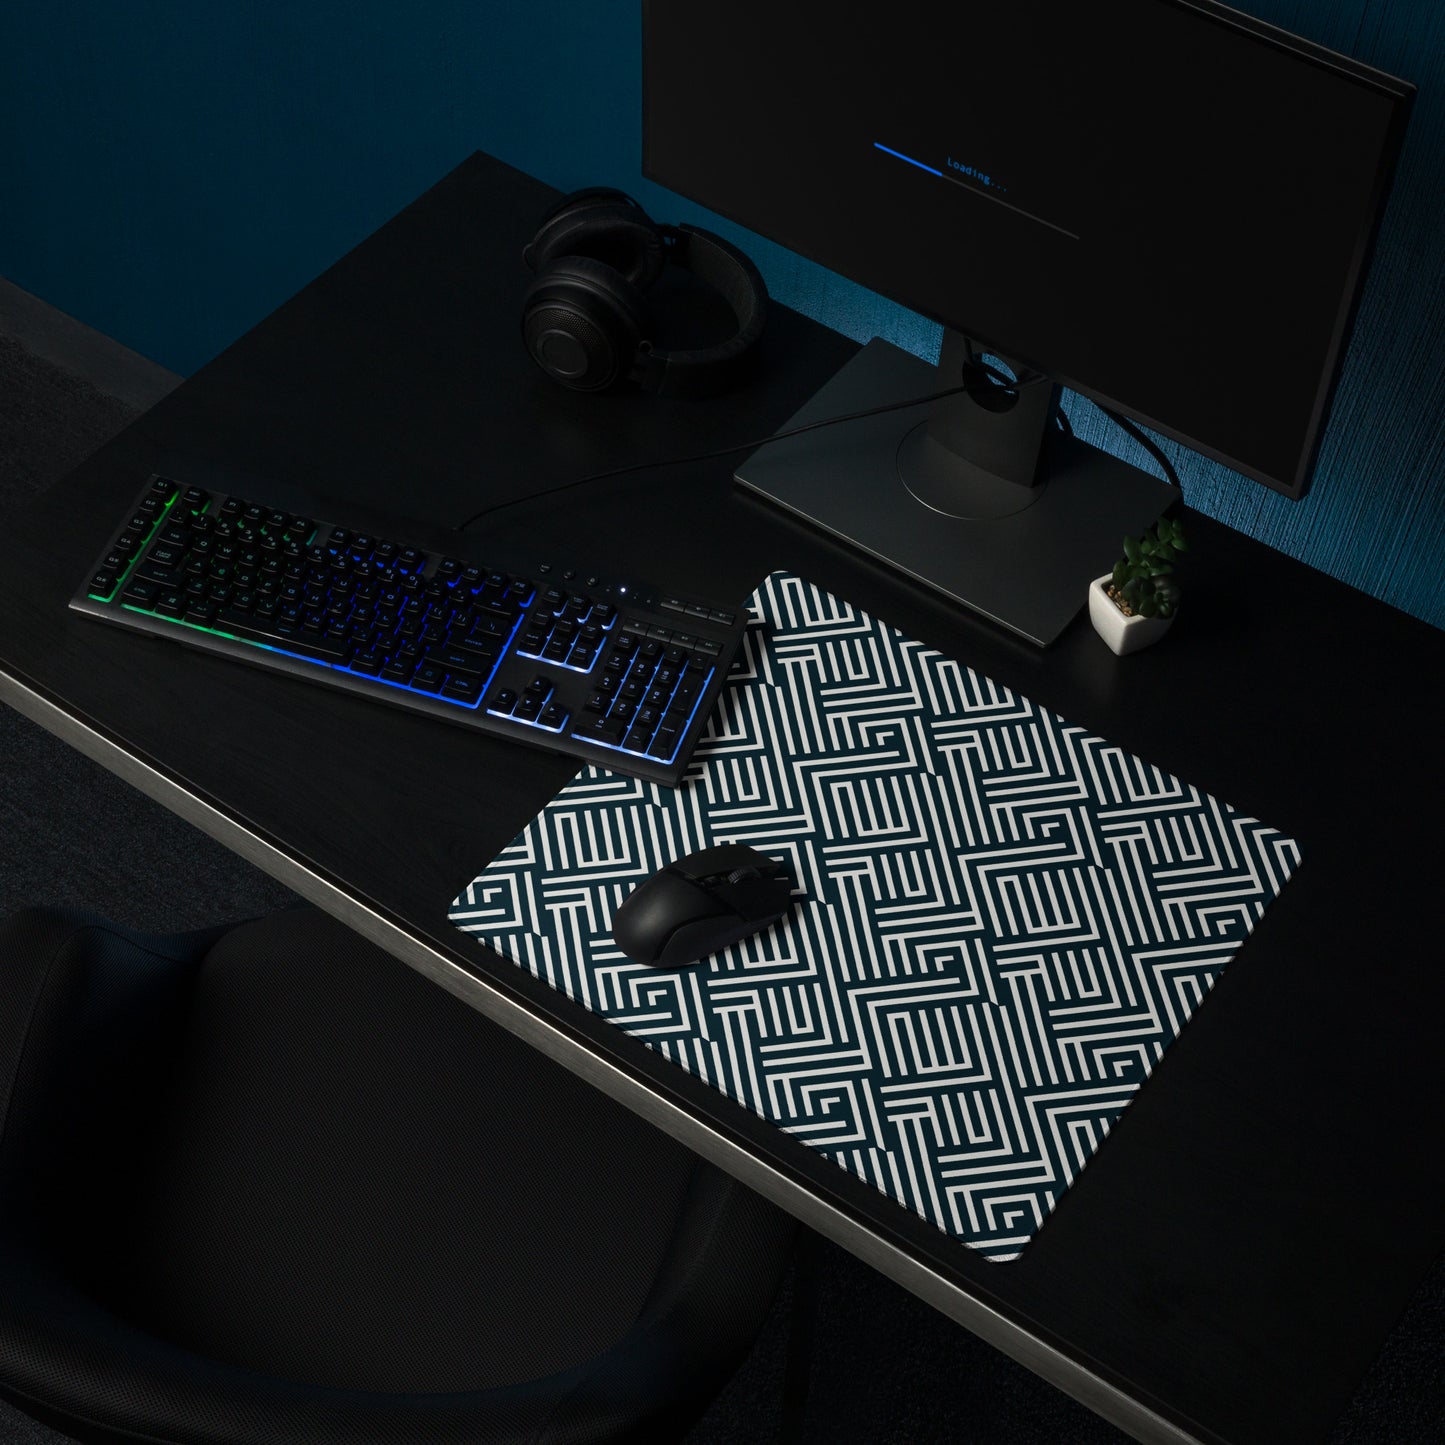 An 18" x 16" gaming desk pad with white lines on a black background. It sits on a black desk with a keyboard, monitor, and mouse.